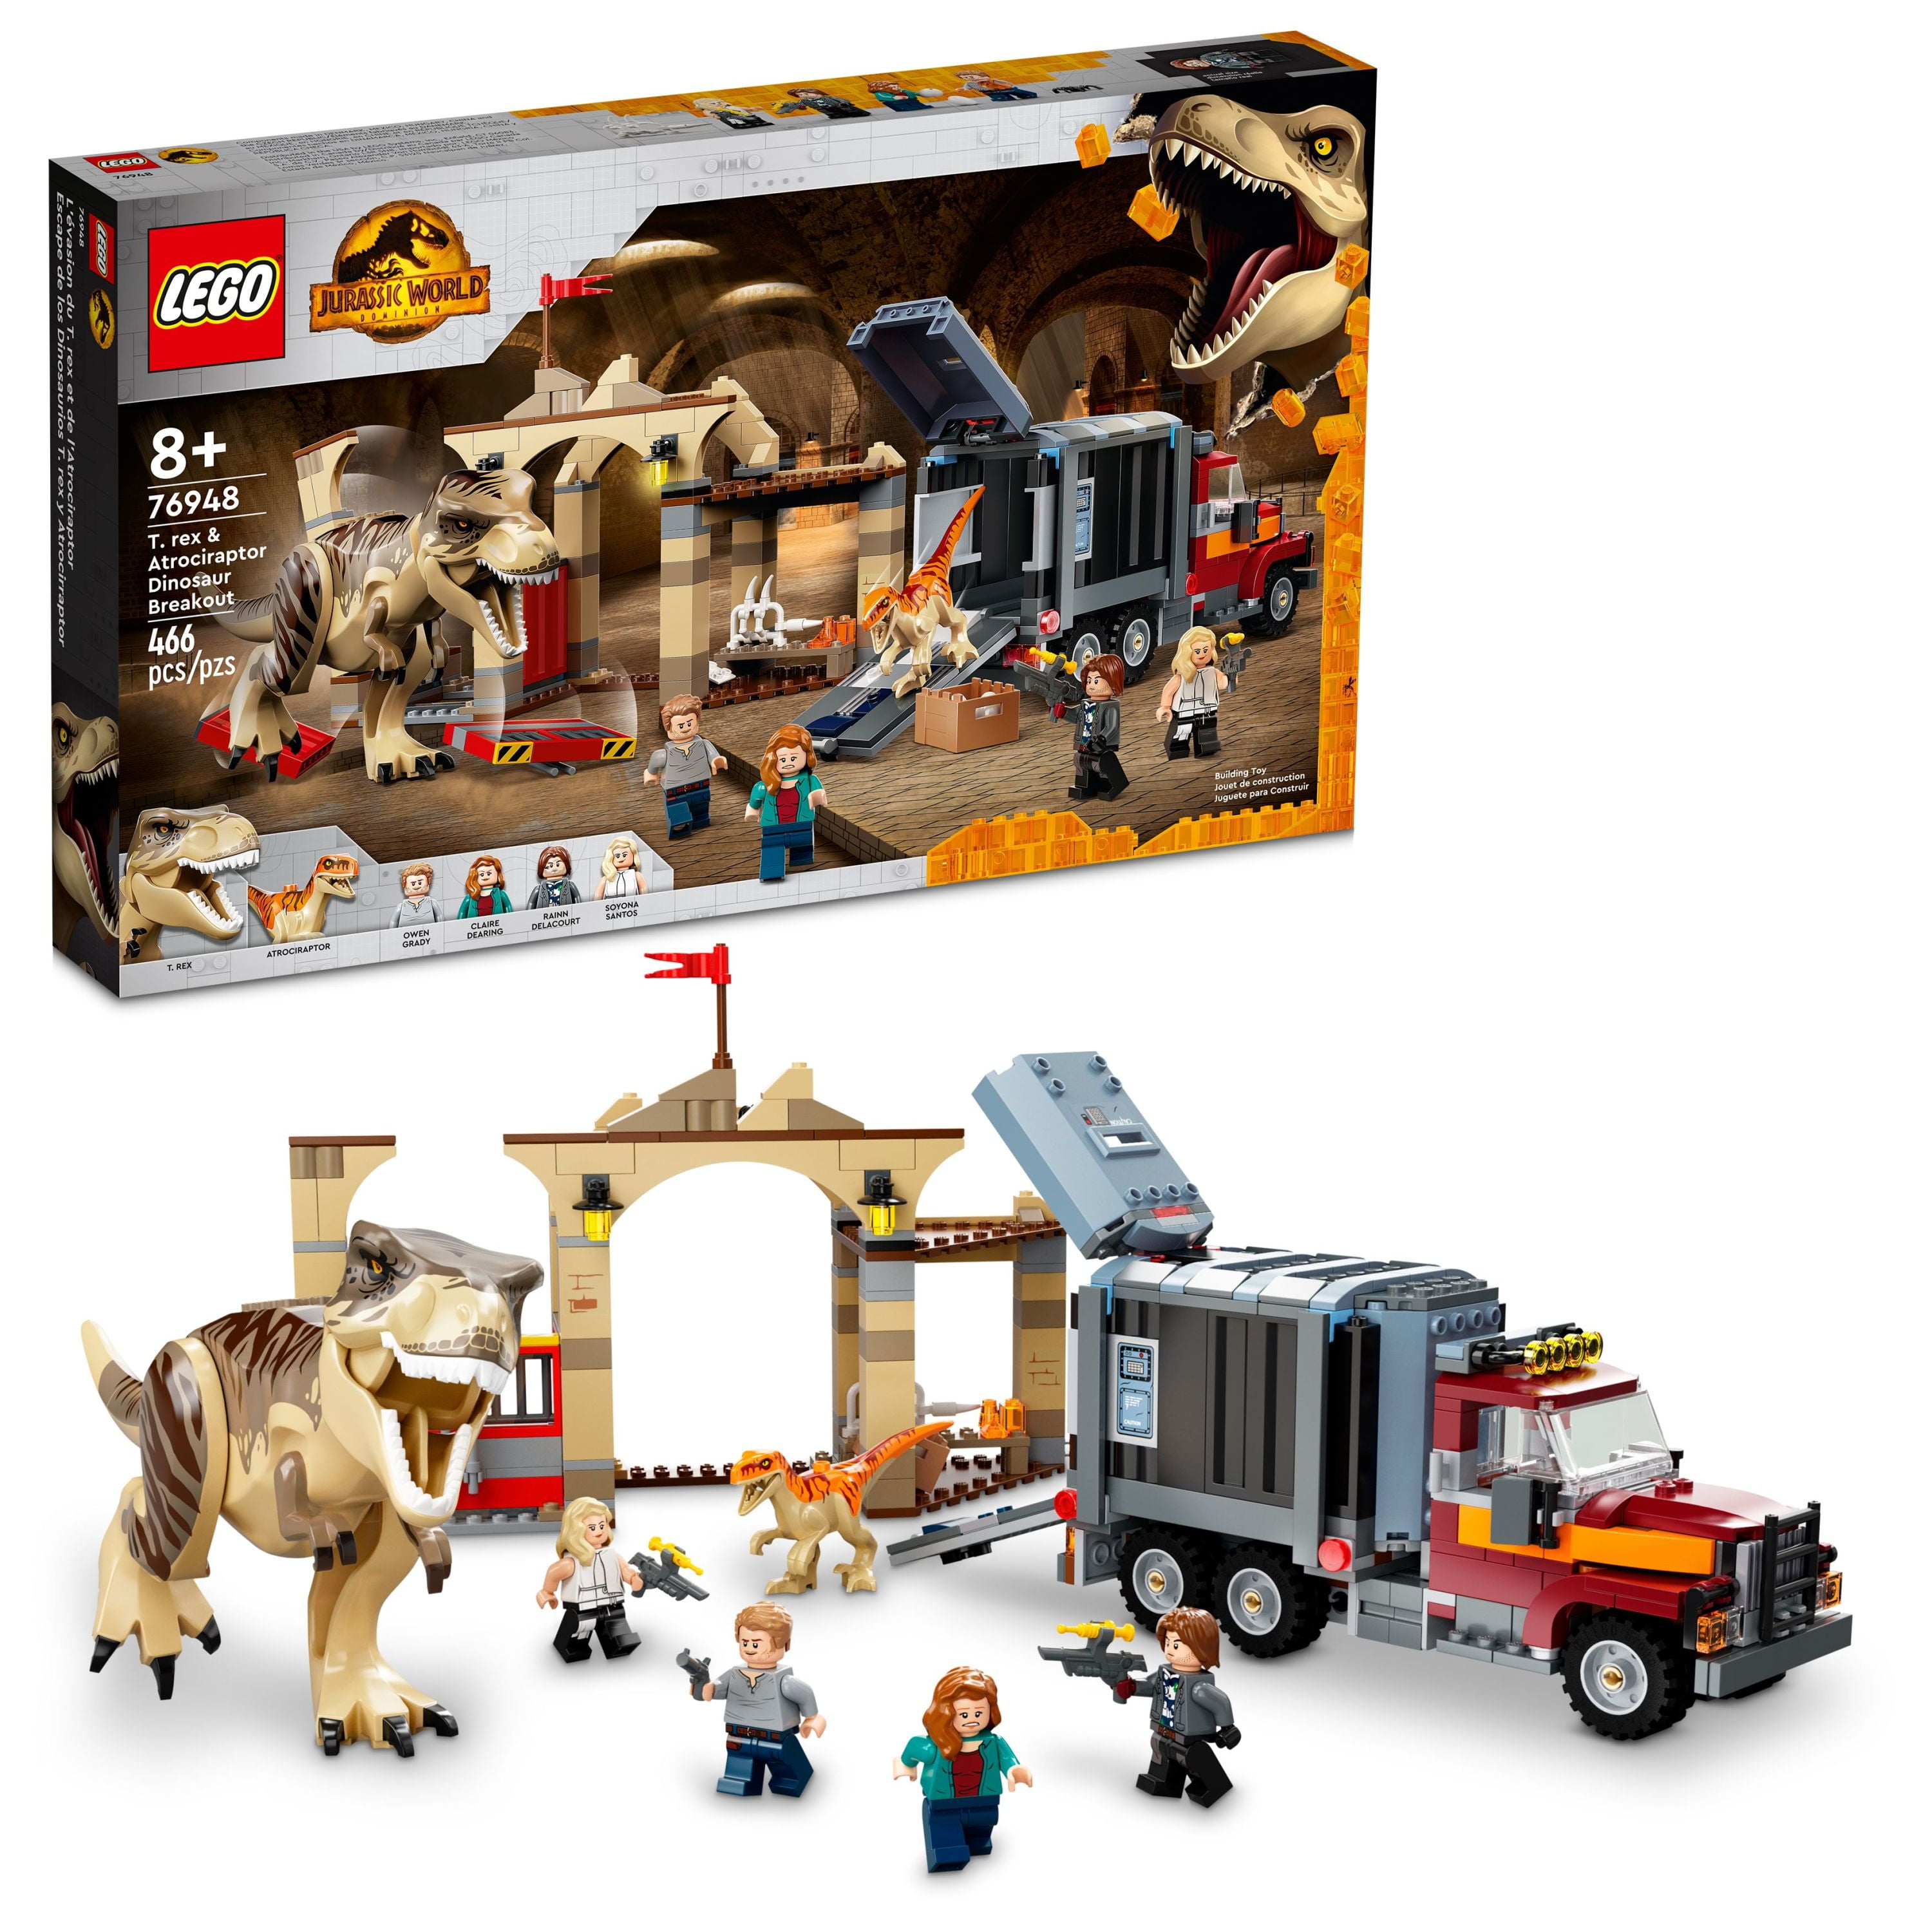 Bane Kassér fascisme LEGO Jurassic World T. rex & Atrociraptor Dinosaur Breakout 76948 Dinosaur  Toys for Kids Ages 8 Plus with 4 Minifigures, Market and Truck, This Jurassic  World Dominion Toy is a Great Gift